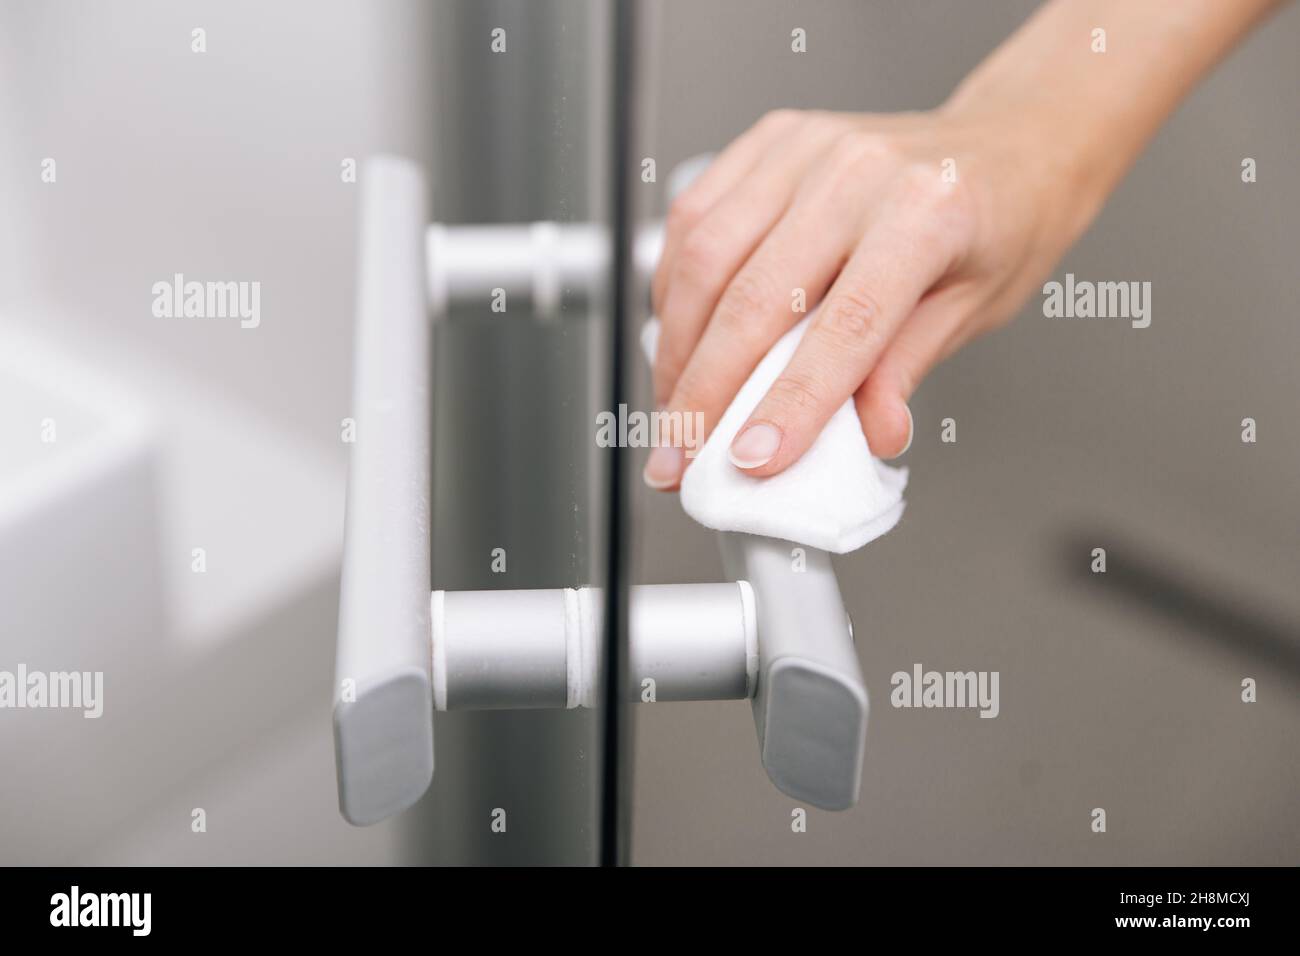 Cleaning glass door handles with an antiseptic wet wipe. Sanitize surfaces prevention in hospital and public spaces against corona virus. Woman hand Stock Photo